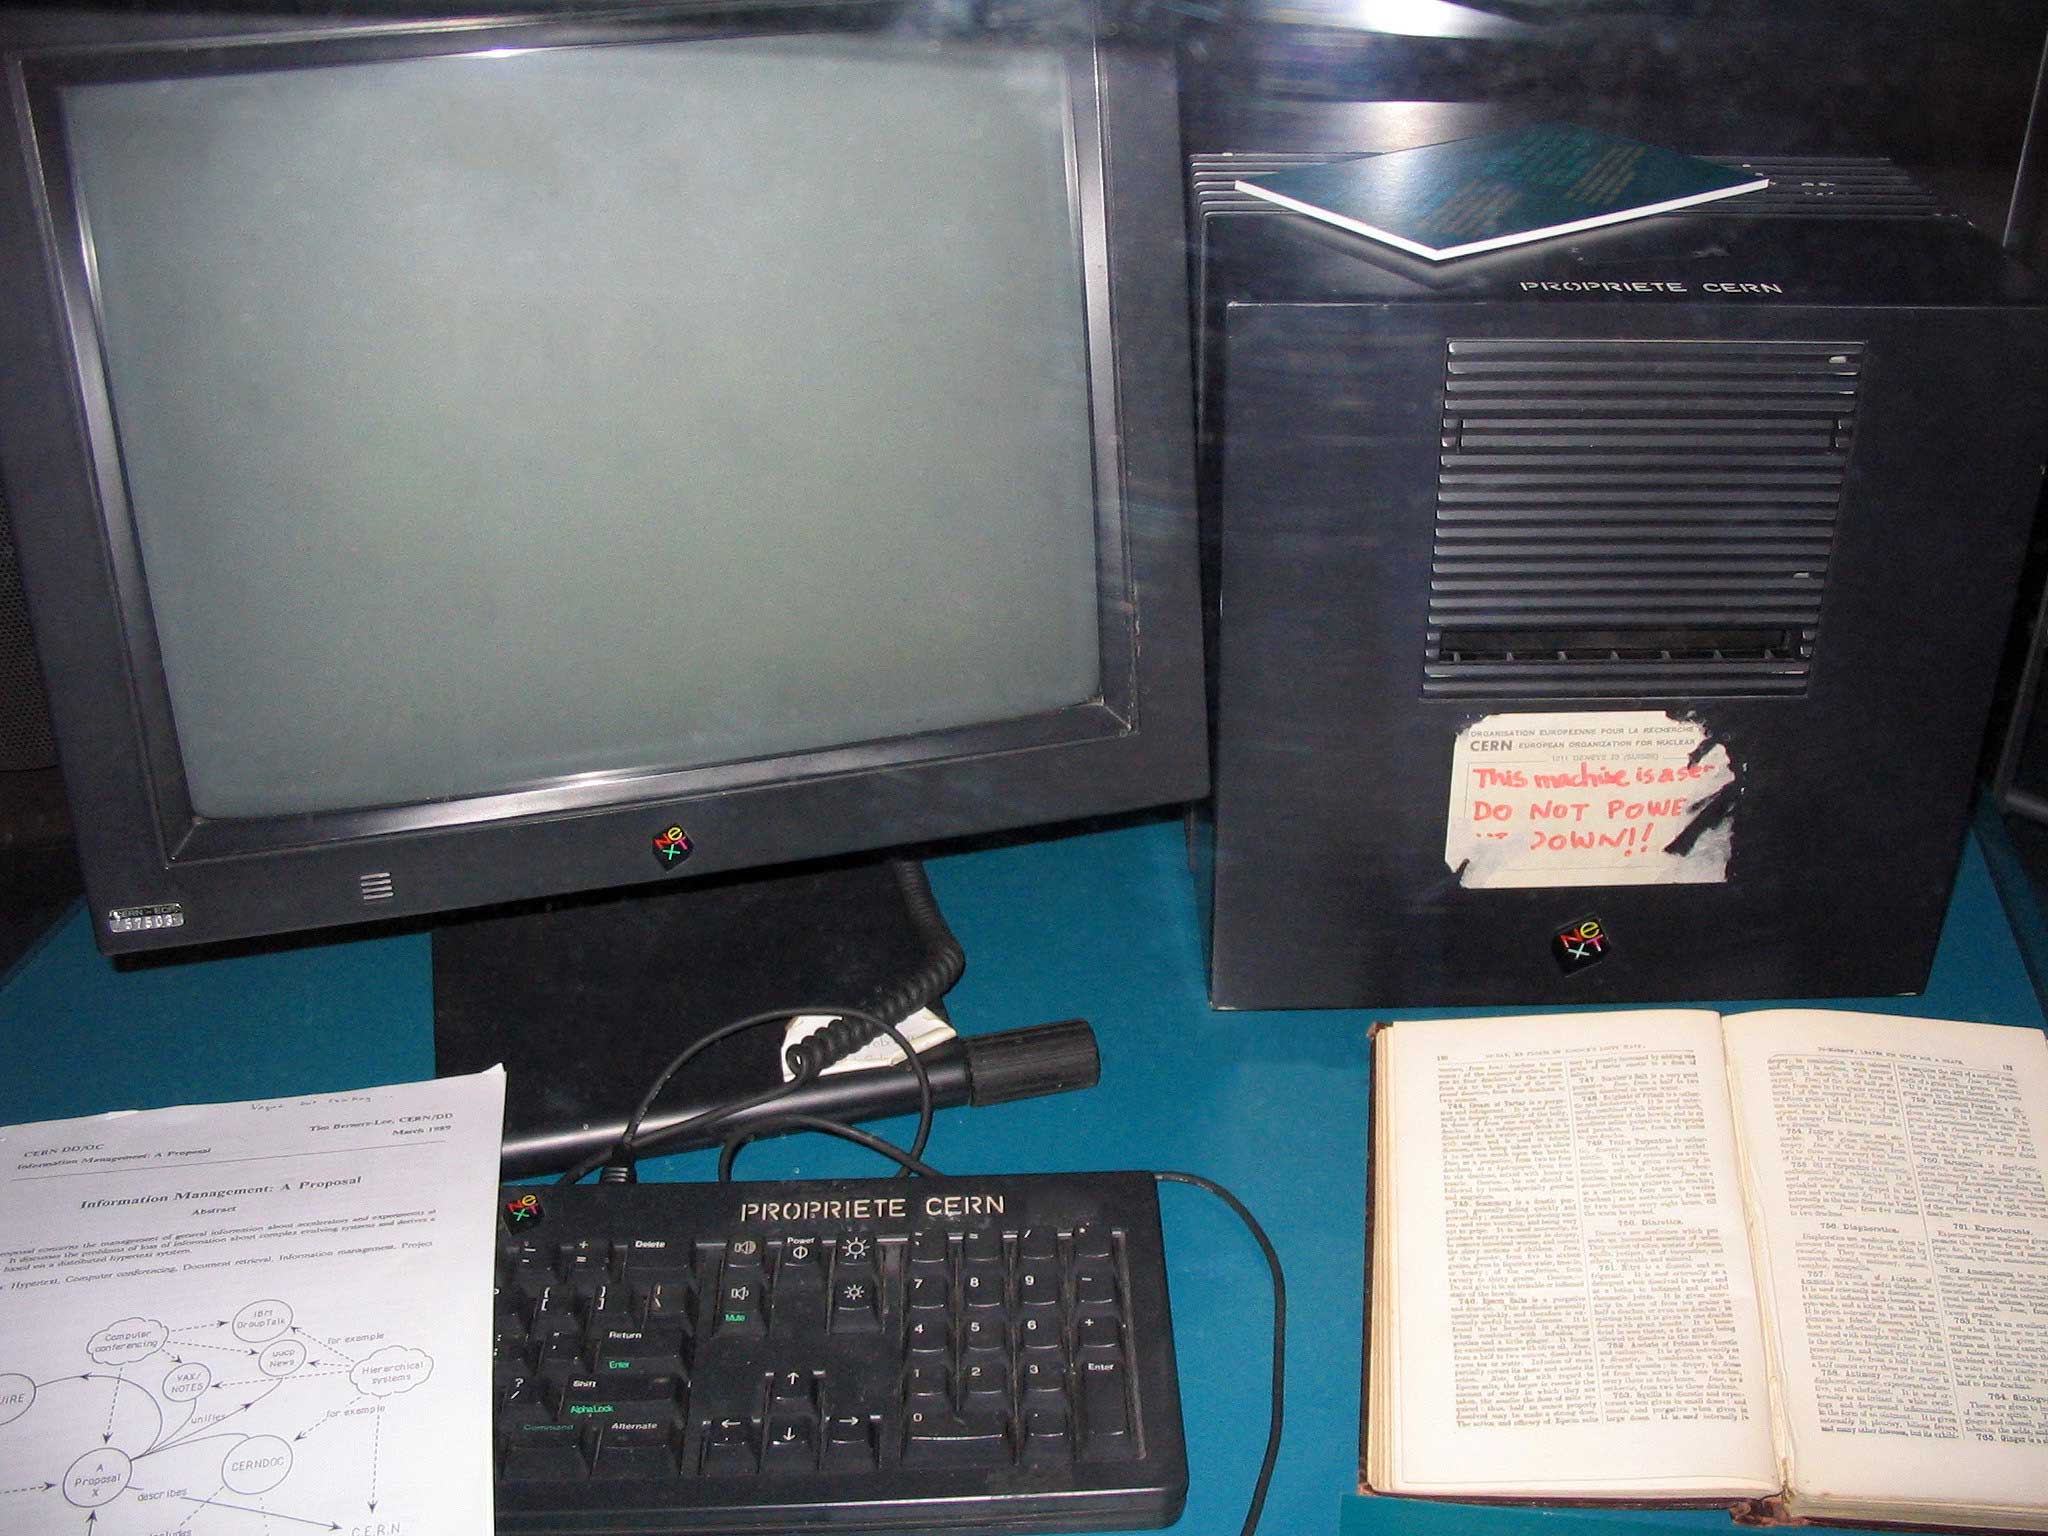 The World's First Web Server